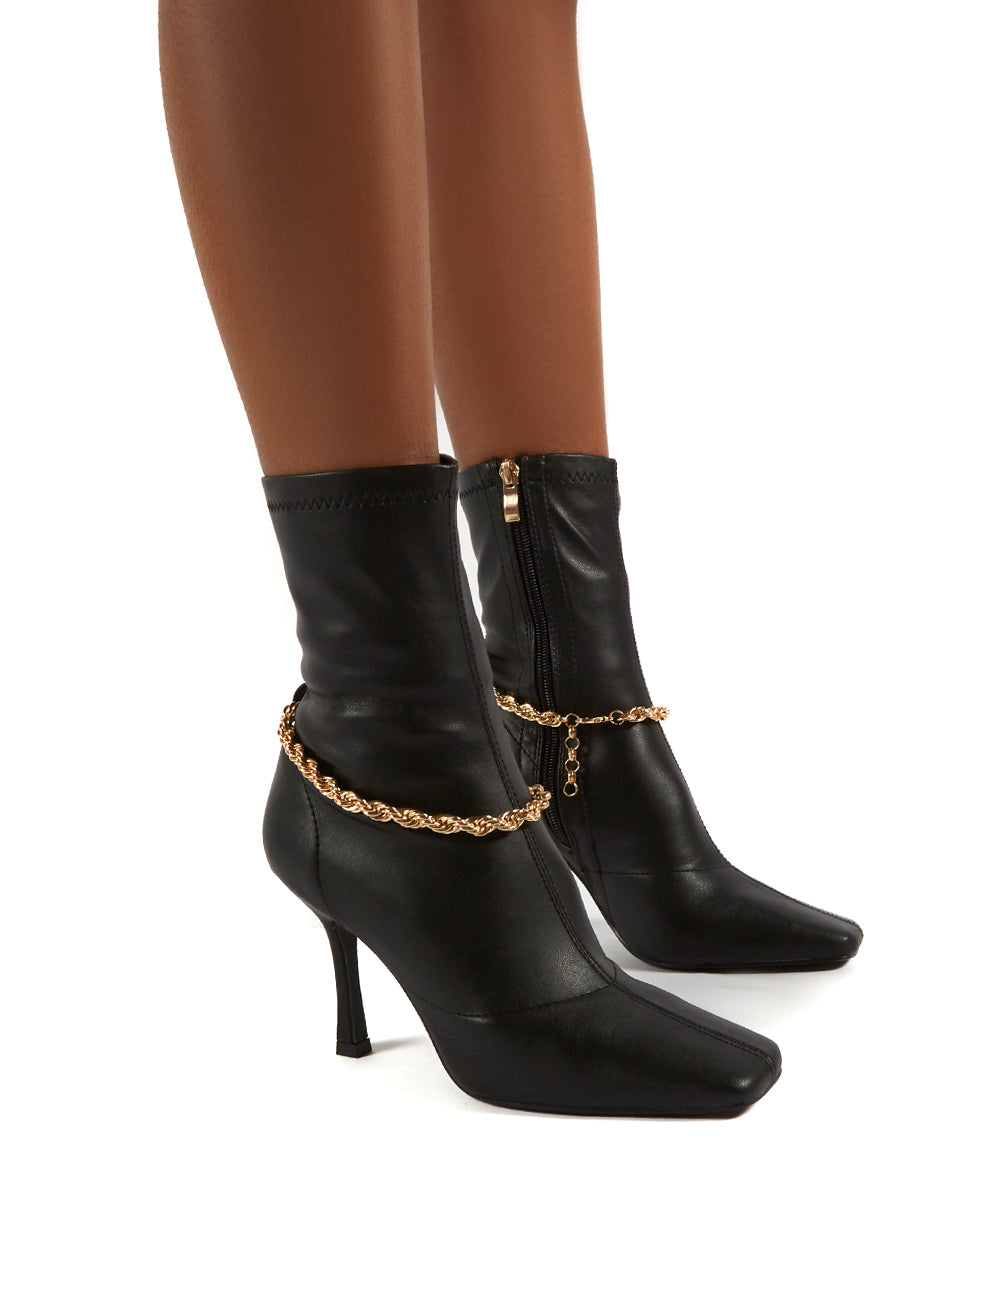 Sacci  Wide Fit Chain Detail Square Toe Stiletto Heel Ankle Boots, Black